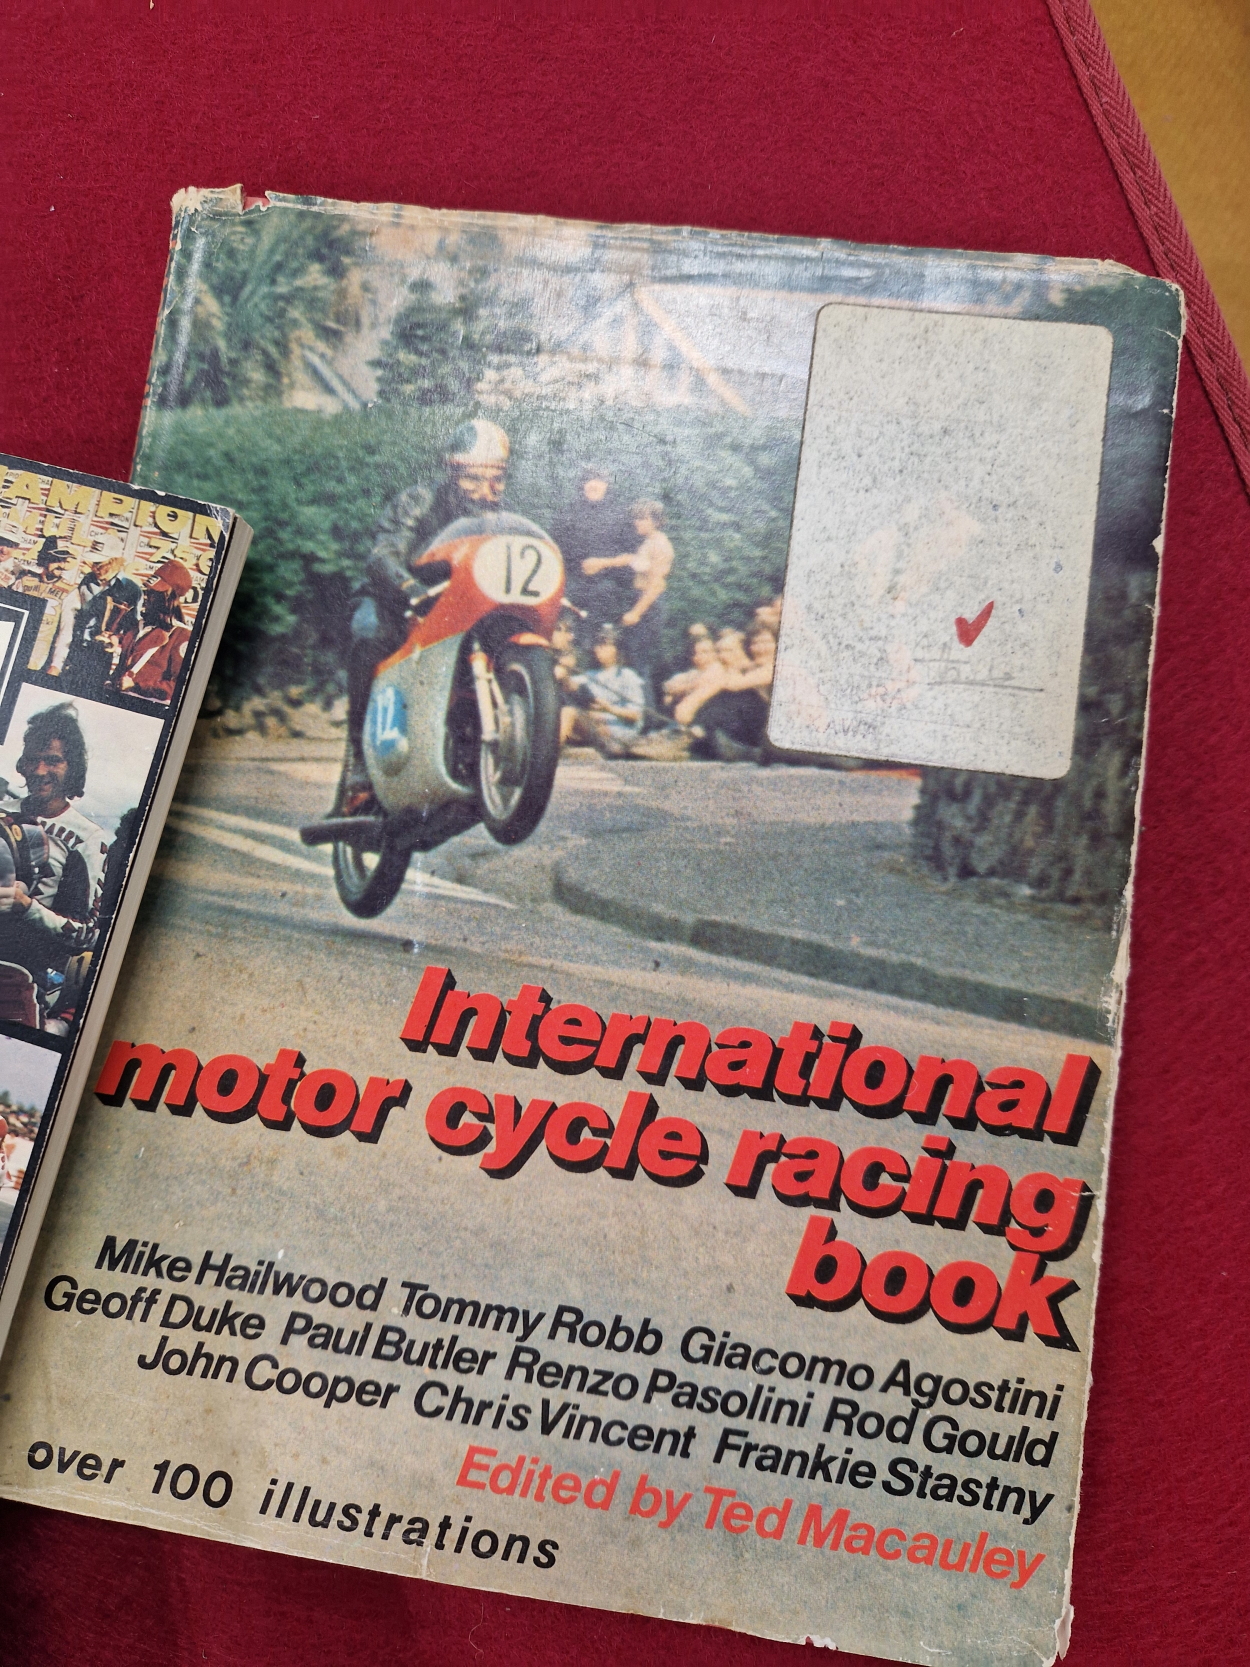 ROD GOULD. BOOKS TO INCLUDE FIFTEEN TIMES , SIGNED BY GIACOMA AGOSTINI. MIKE THE BIKE AGAIN, - Image 4 of 11